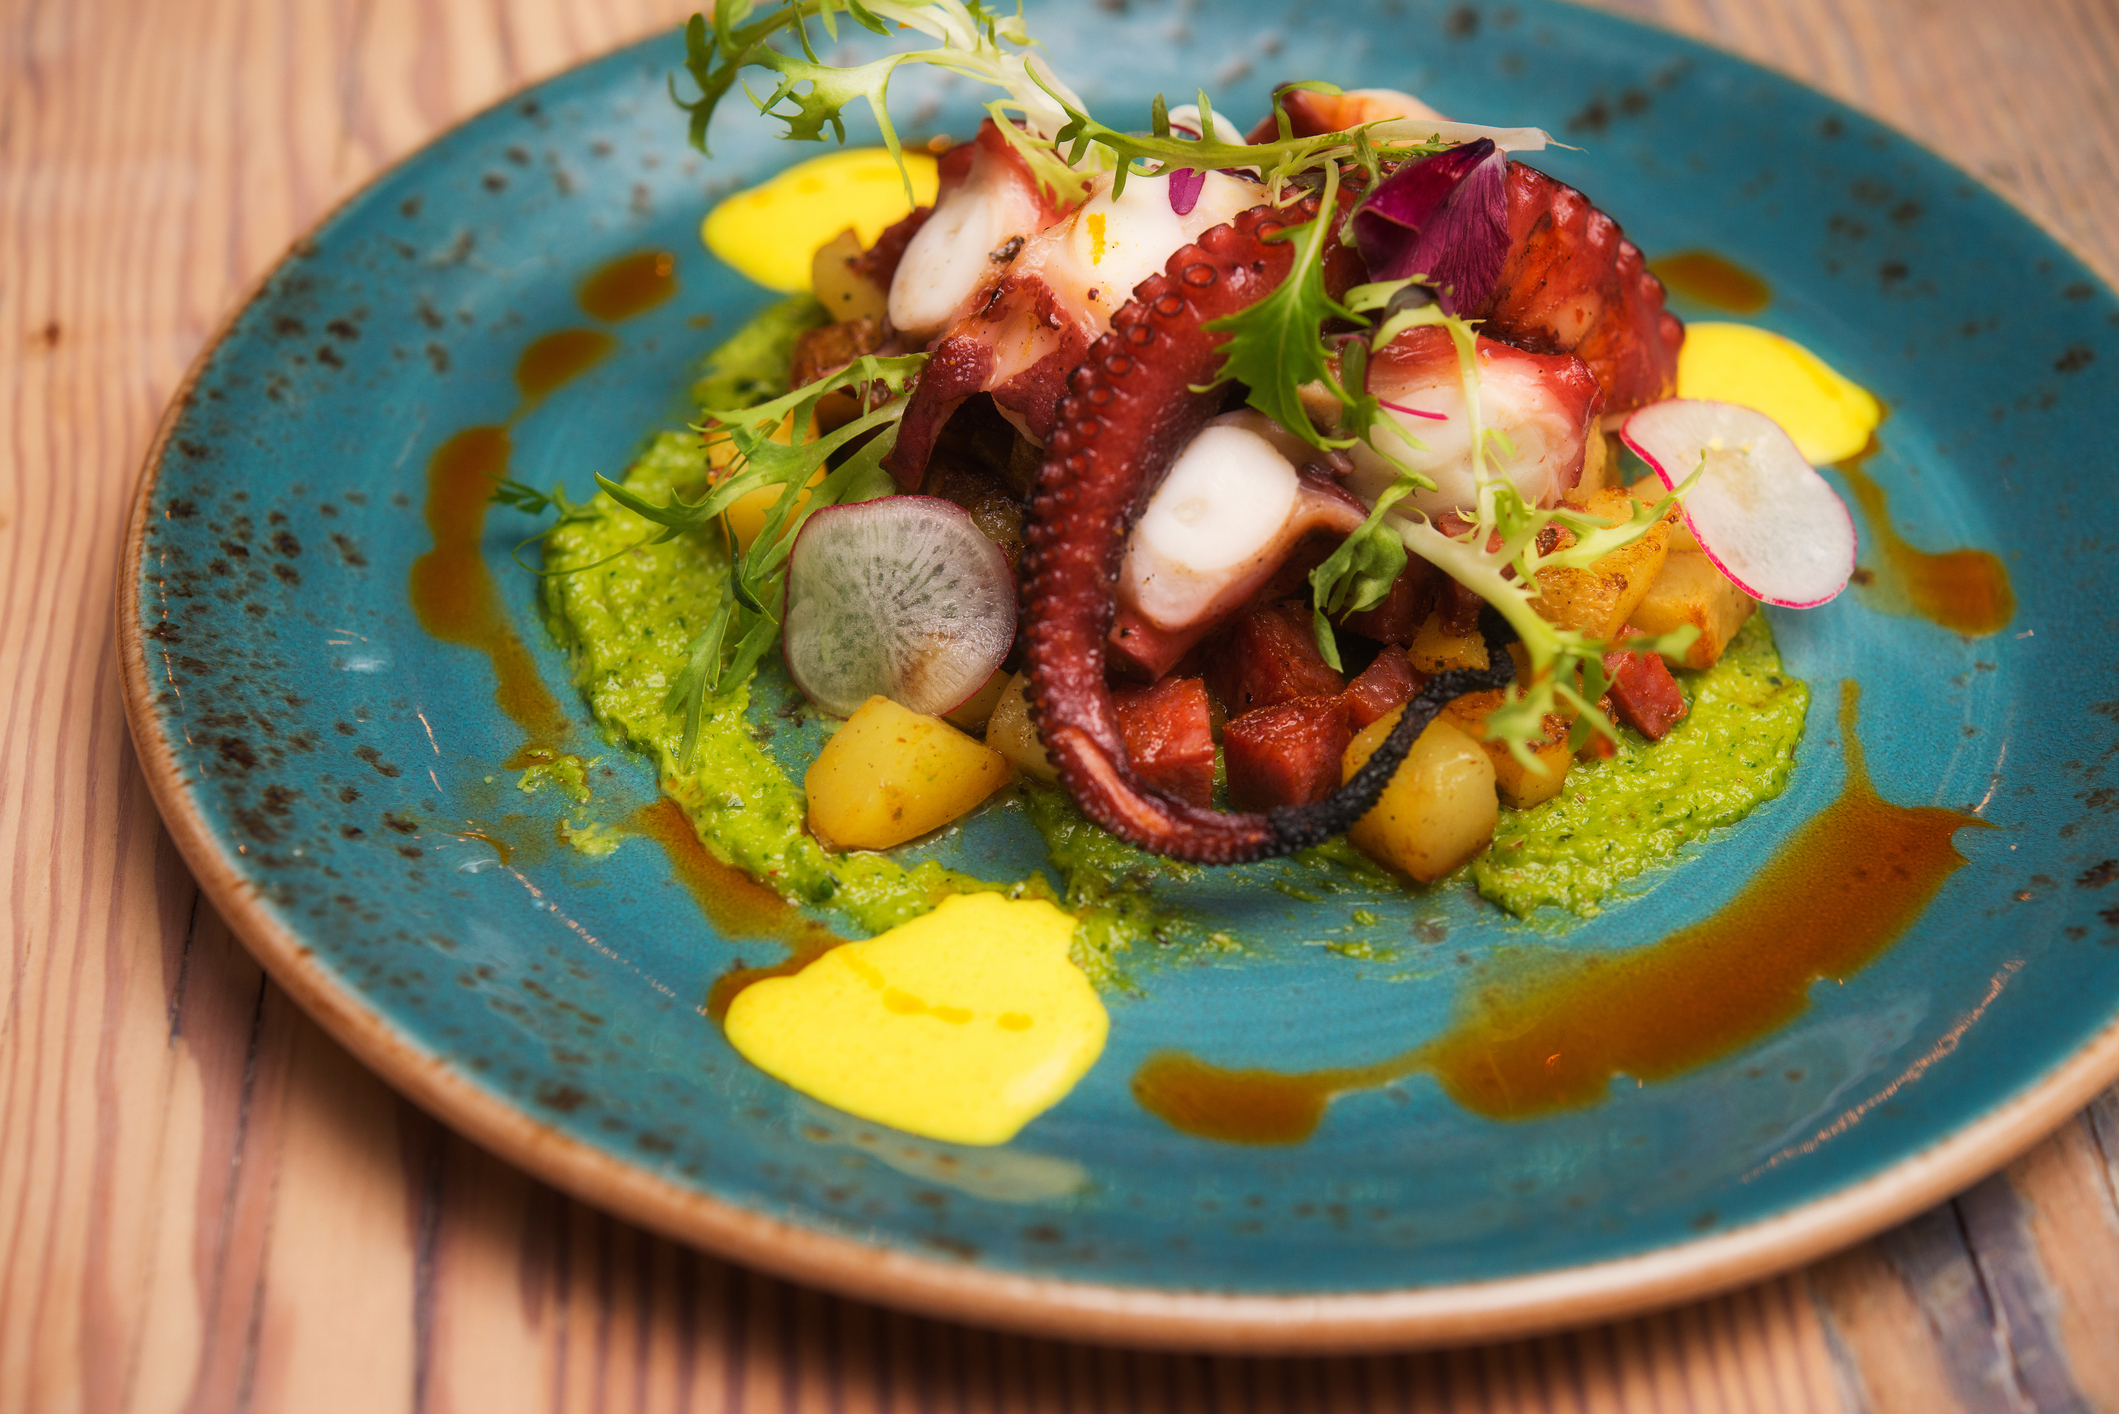 Grilled octopus served with vegetables on a blue plate